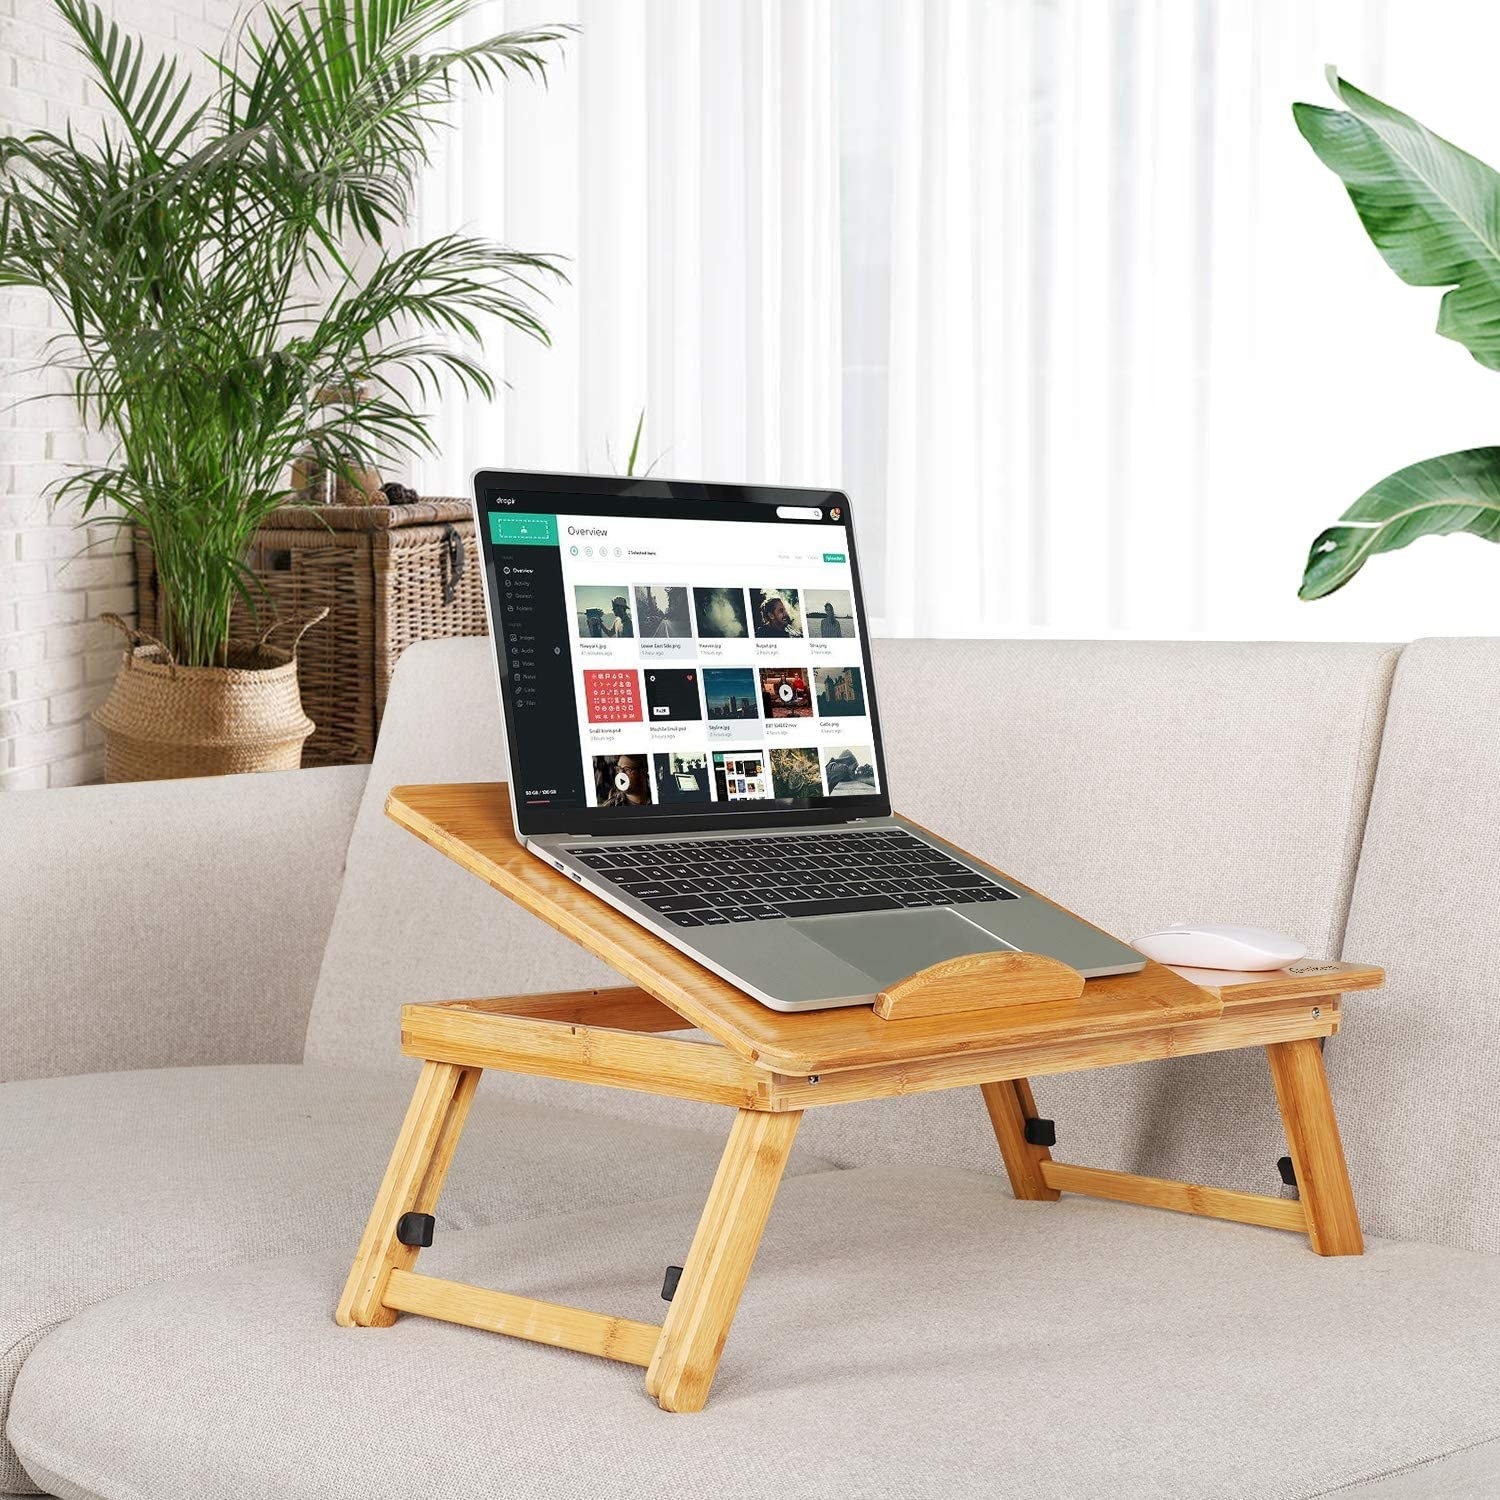 bamboo laptop desk with a laptop on it propped up on a sofa